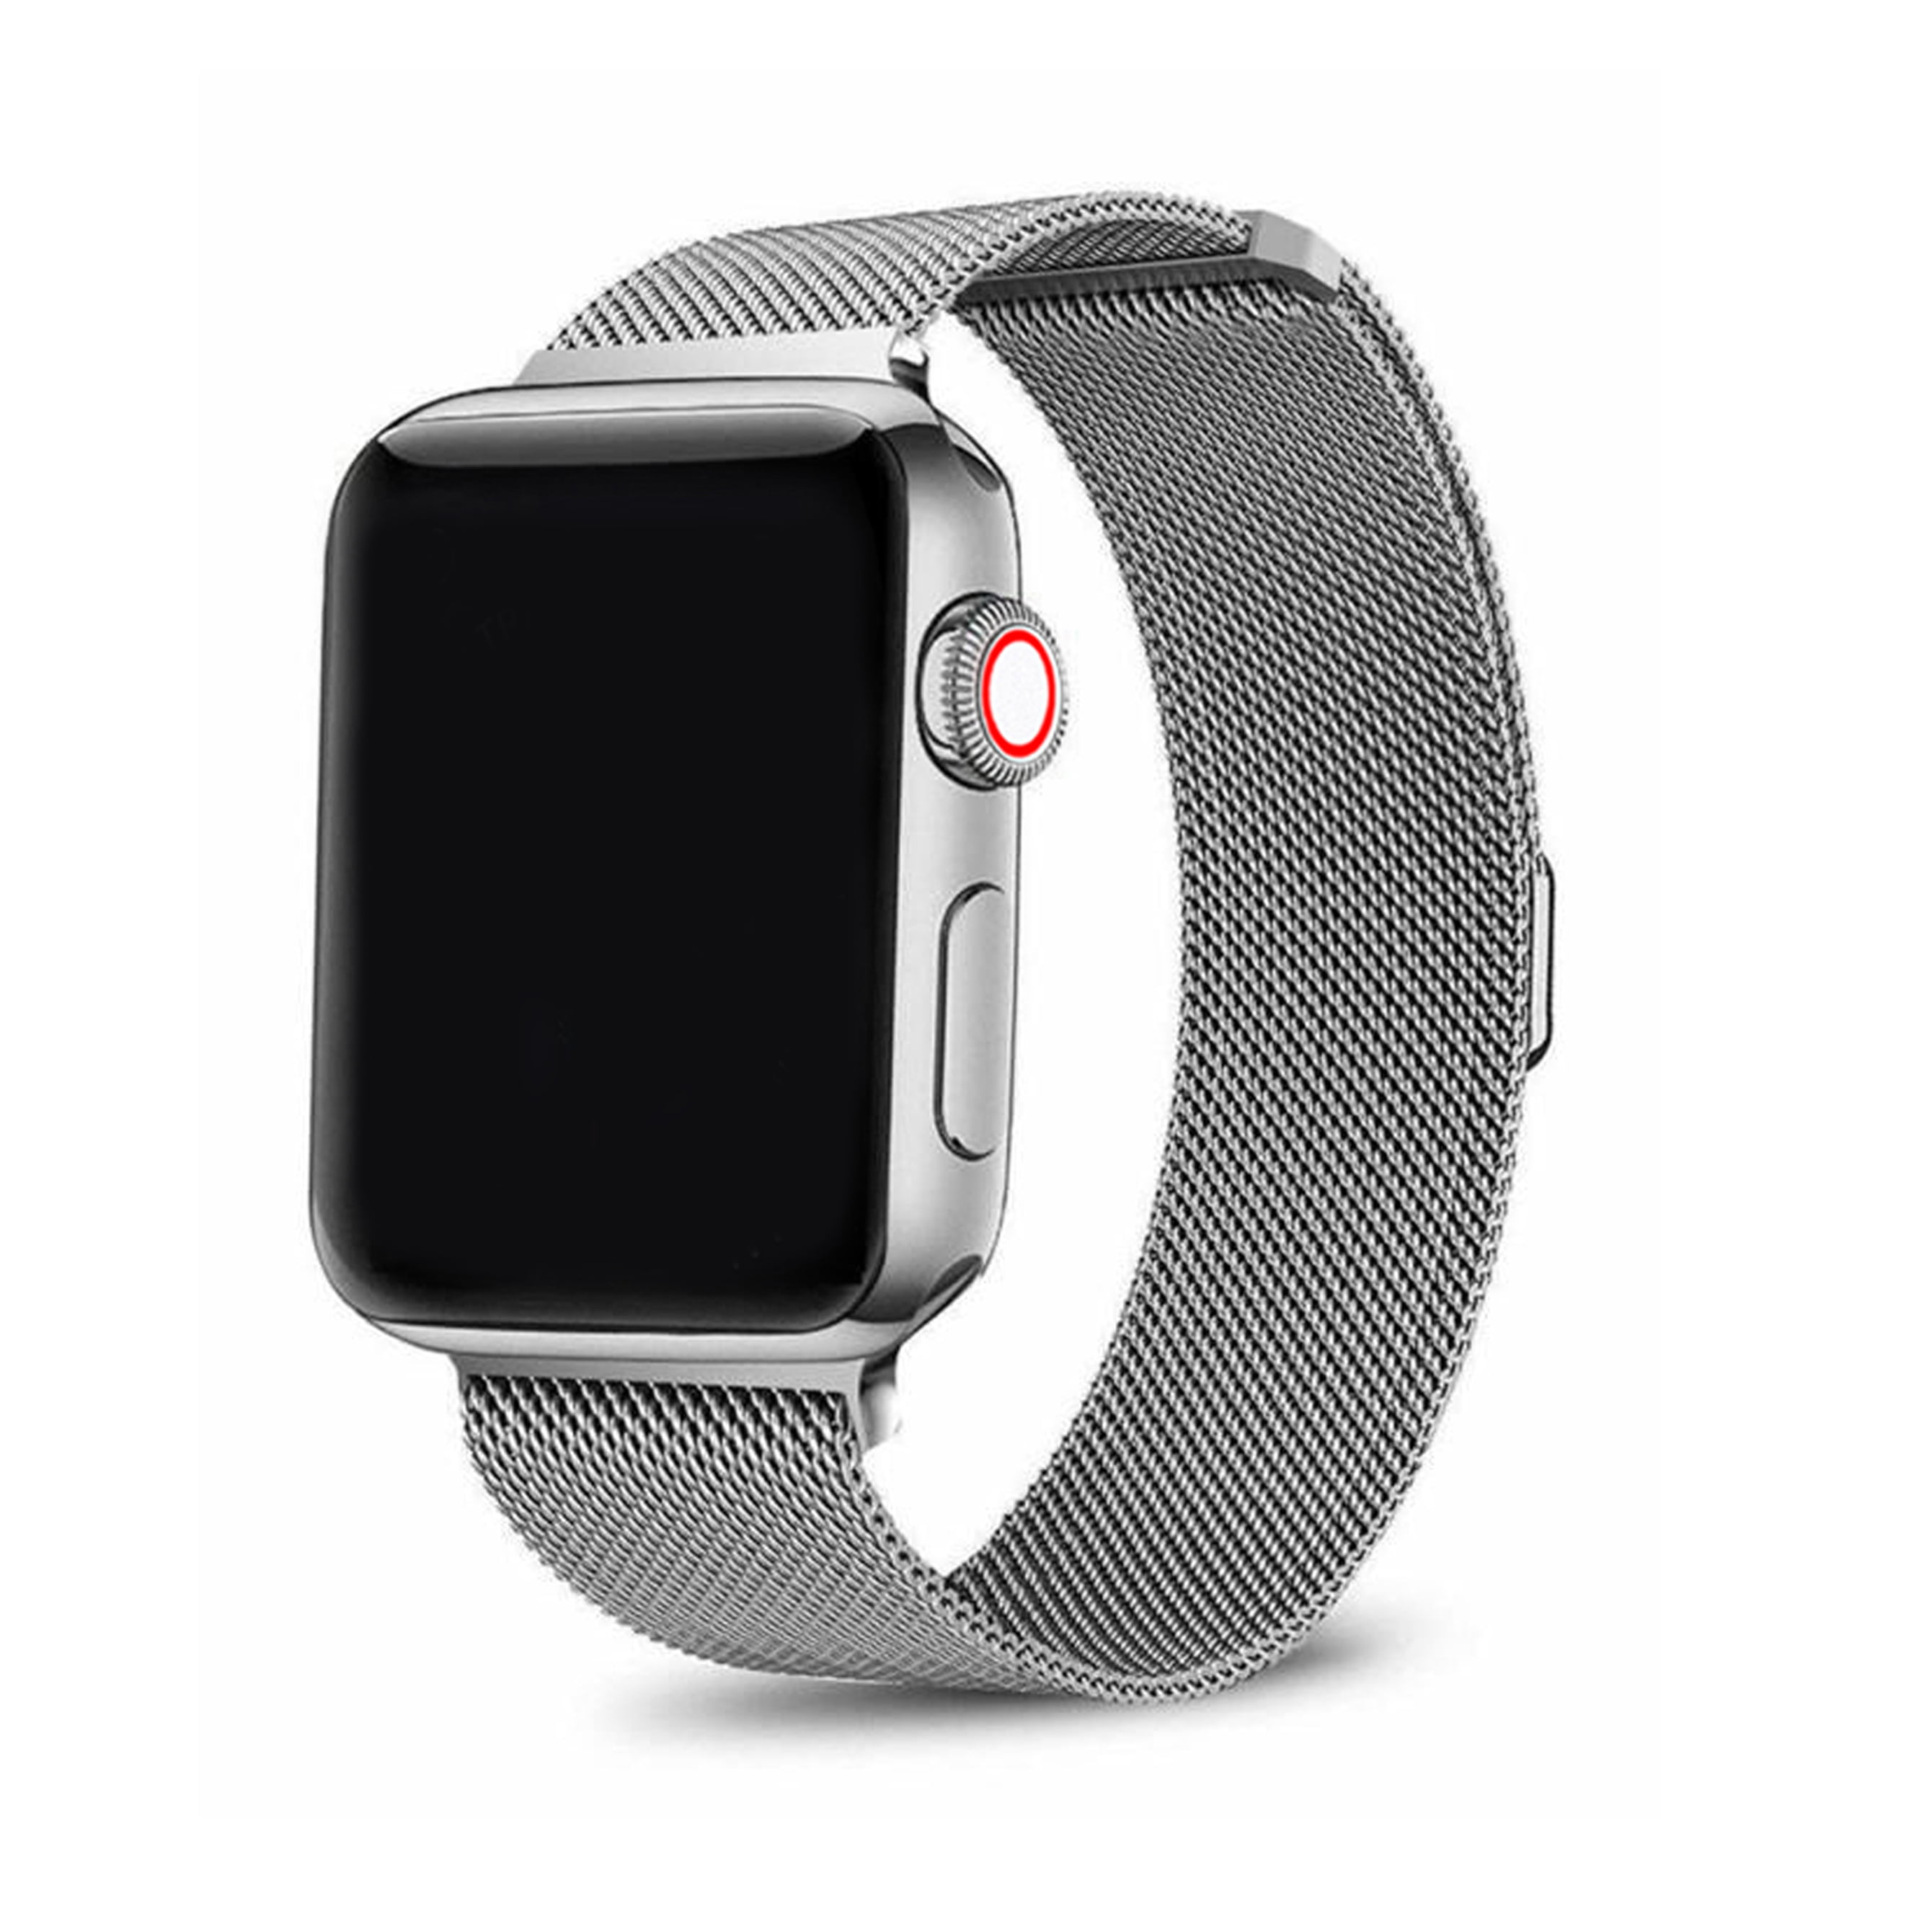 Posh Tech - Posh Tech Apple Watch Stainless Steel Loop Bands for iWatch